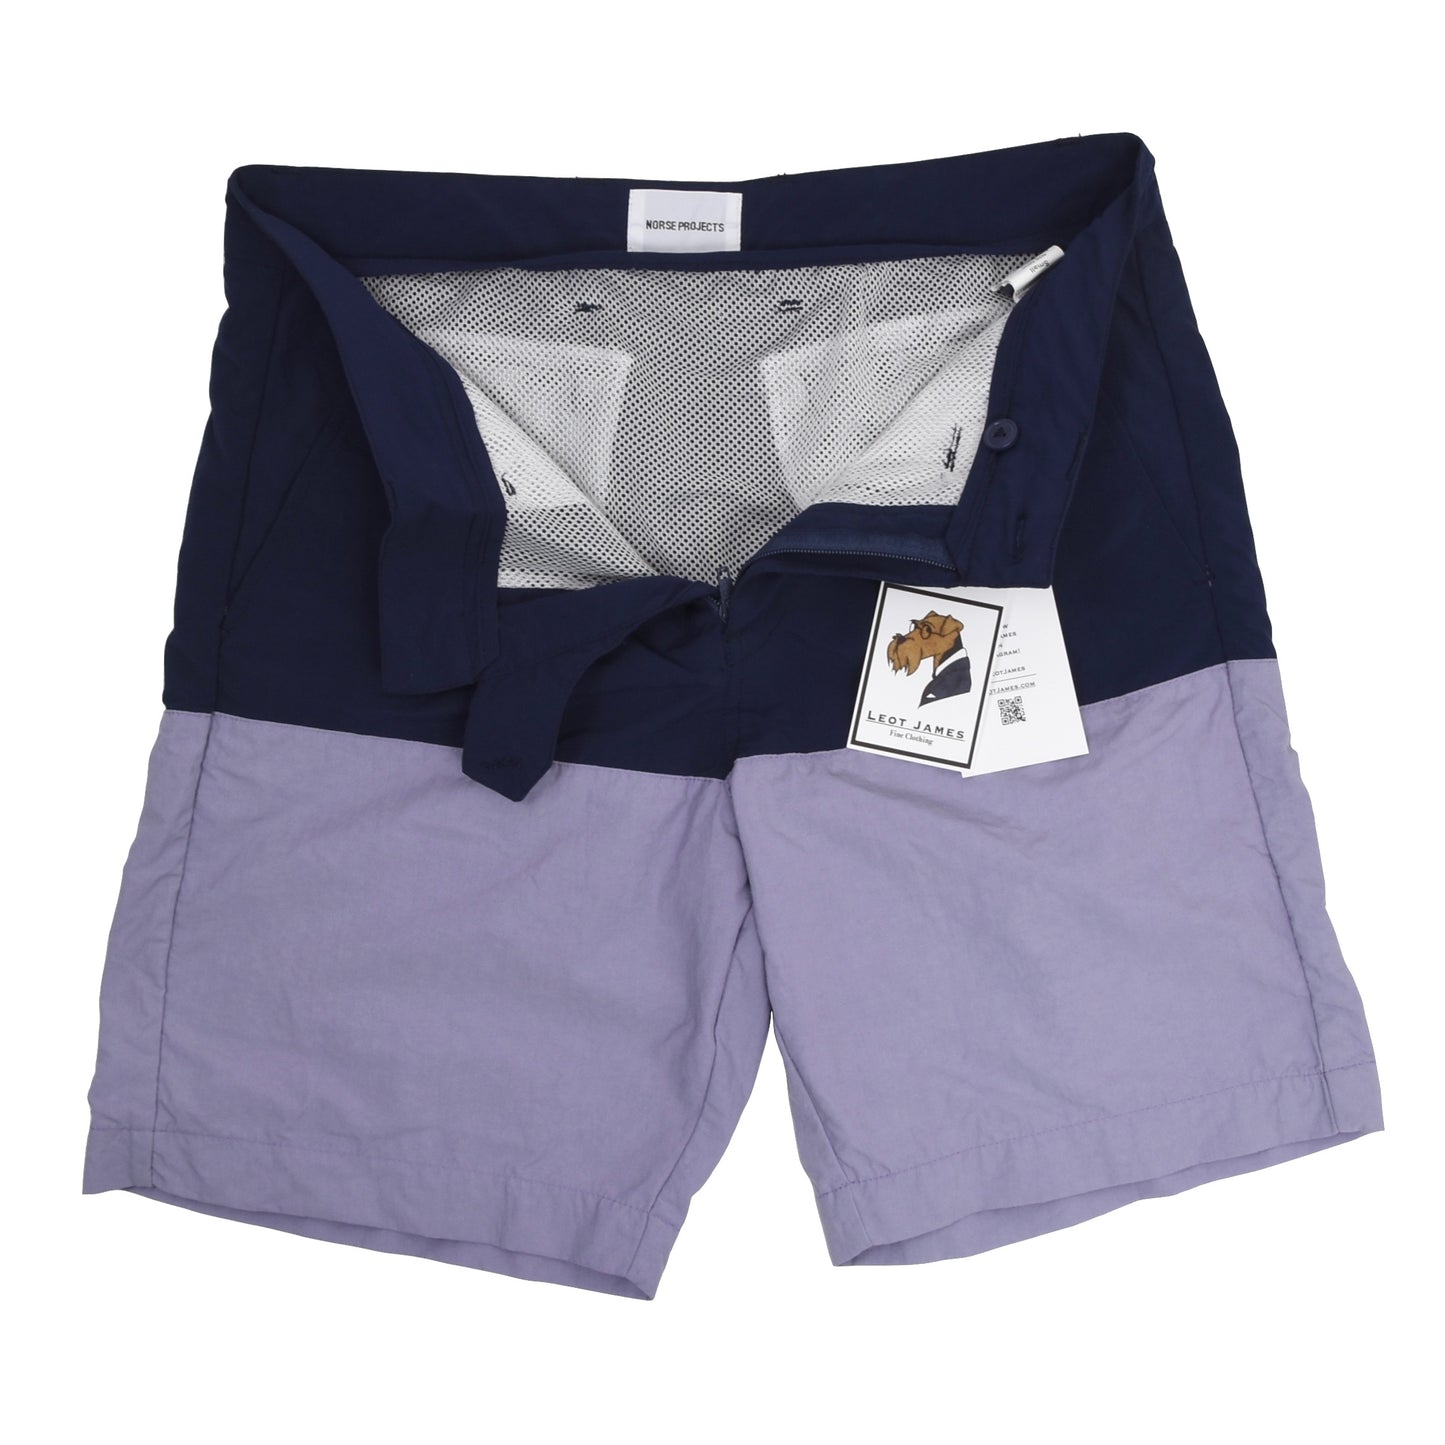 Norse Projects Swim Shorts/Trunks Size Small - Navy Blue/Lavender